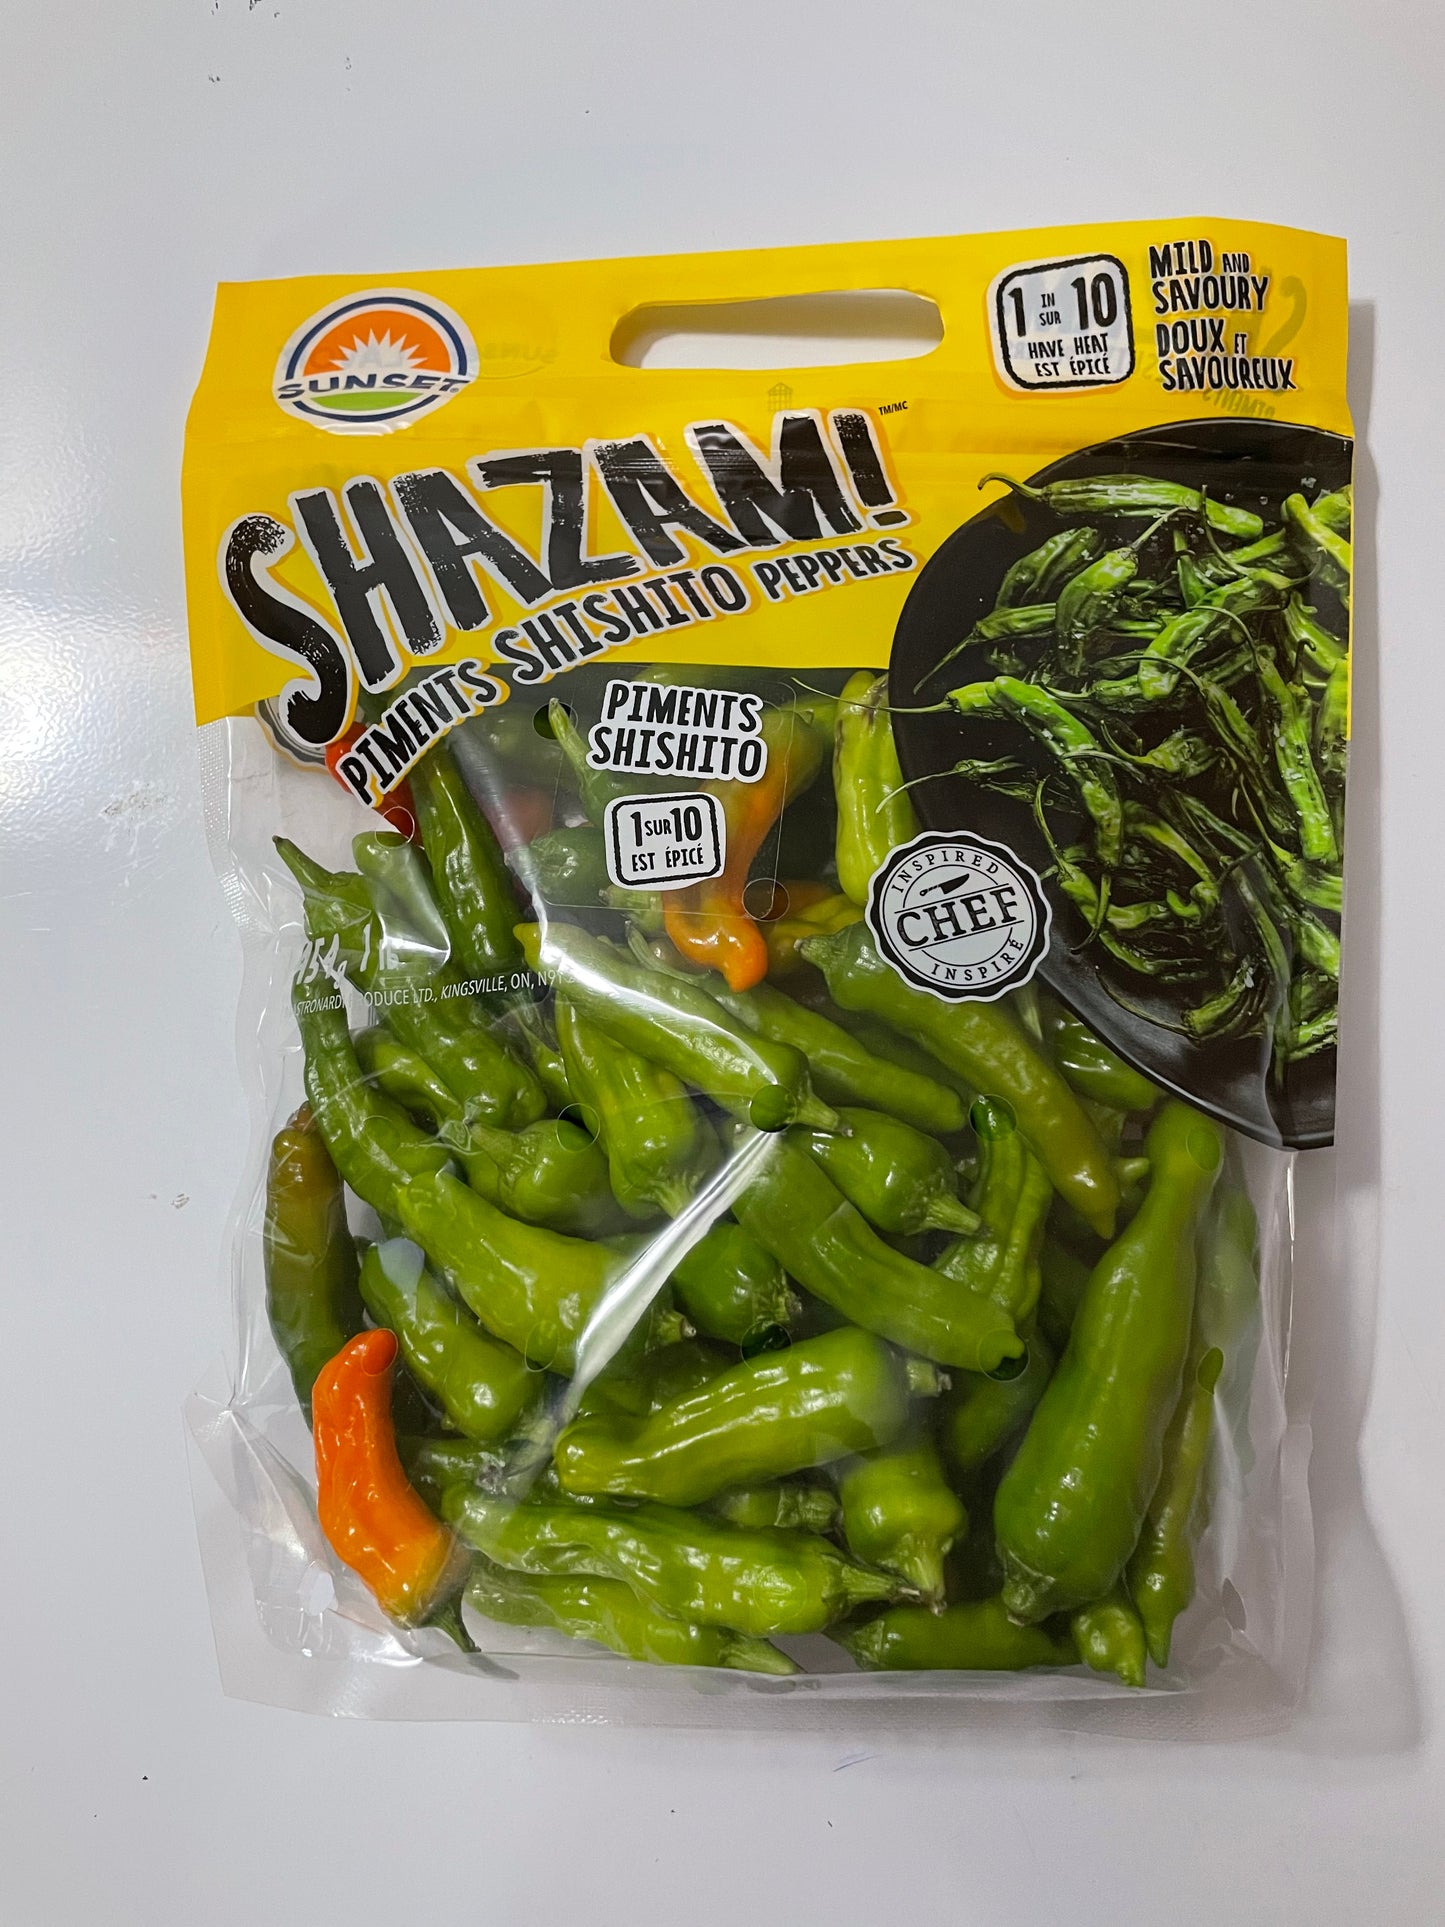 Spicy Shishito Peppers bag of 20